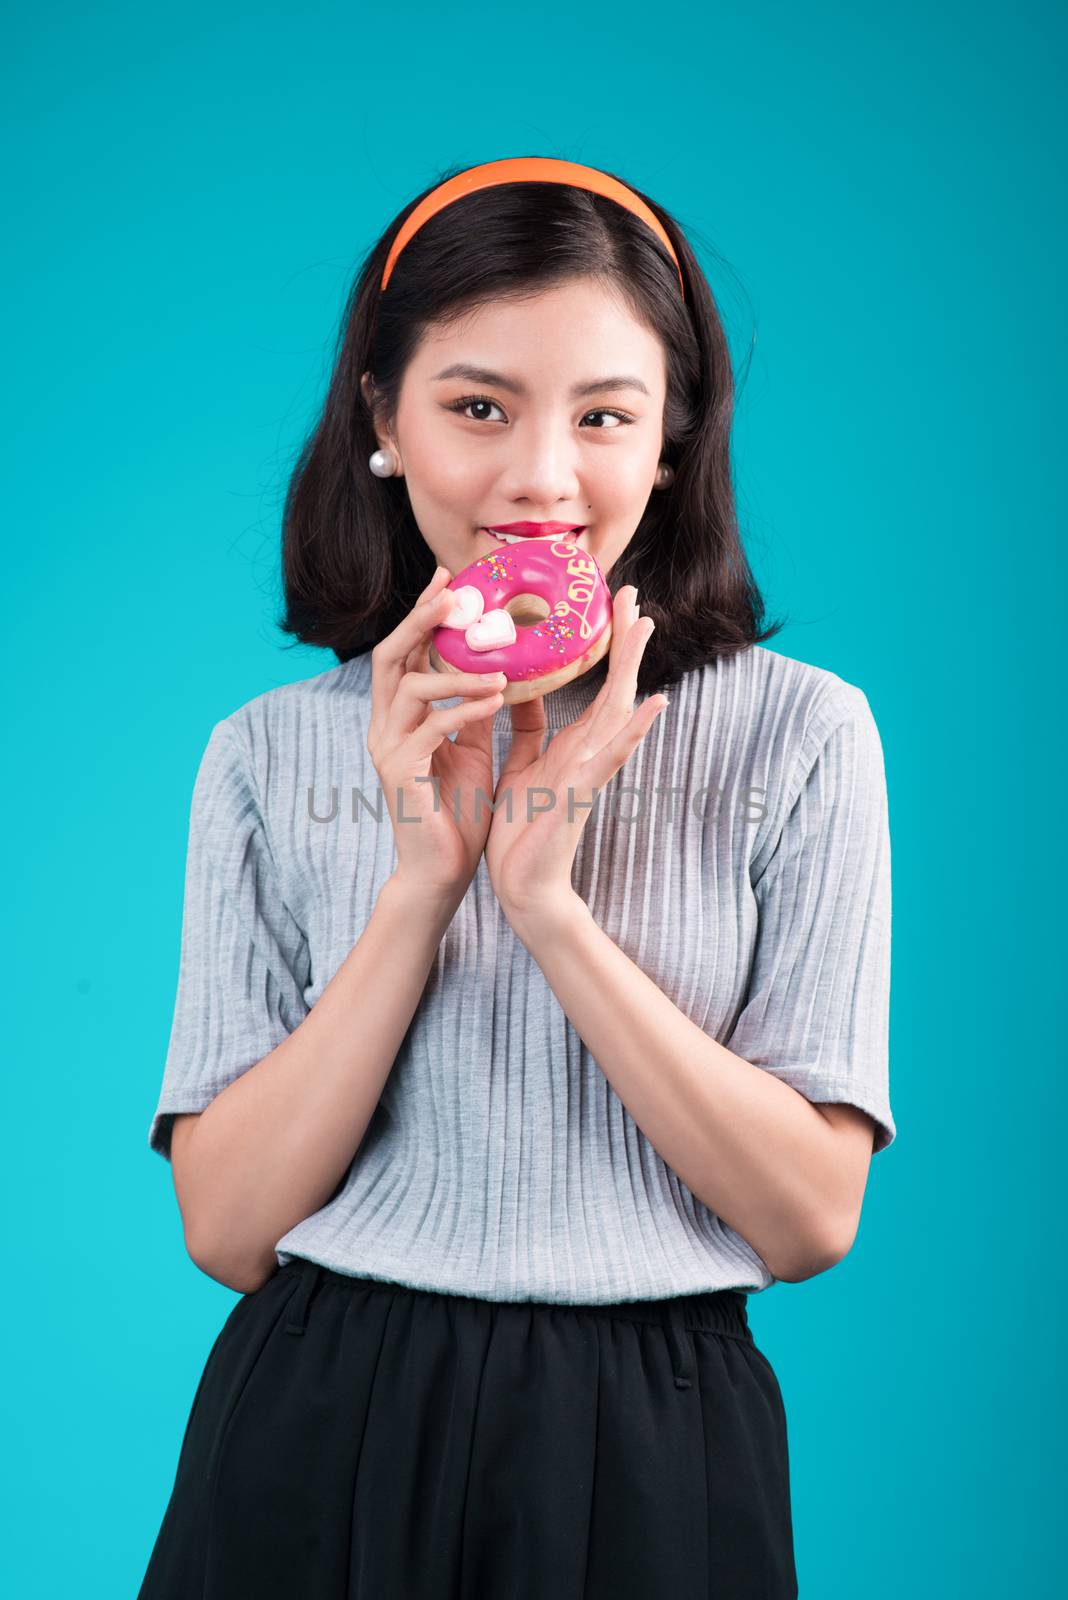 Asian beauty girl holding pink donut. Retro joyful woman with sw by makidotvn